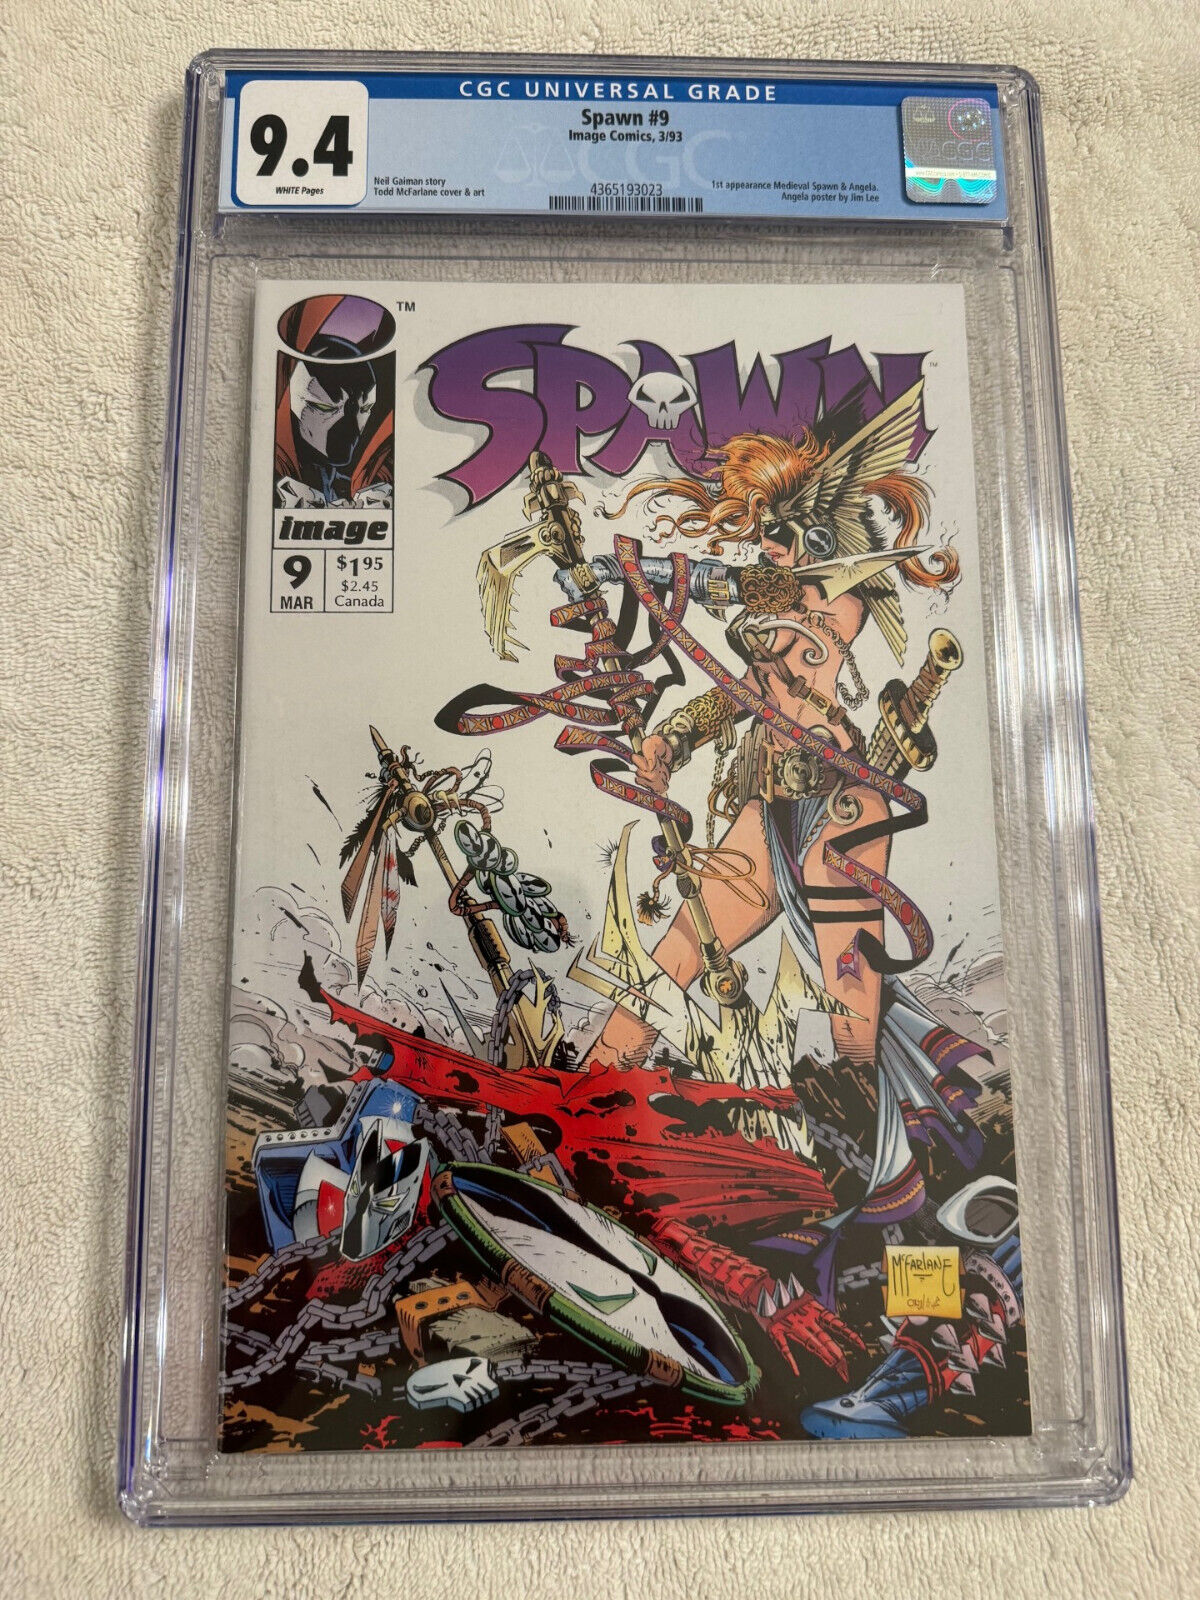 Spawn #9 - CGC 9.4 - White Pages - 1st app. Medieval Spawn & Angela - Image 1993